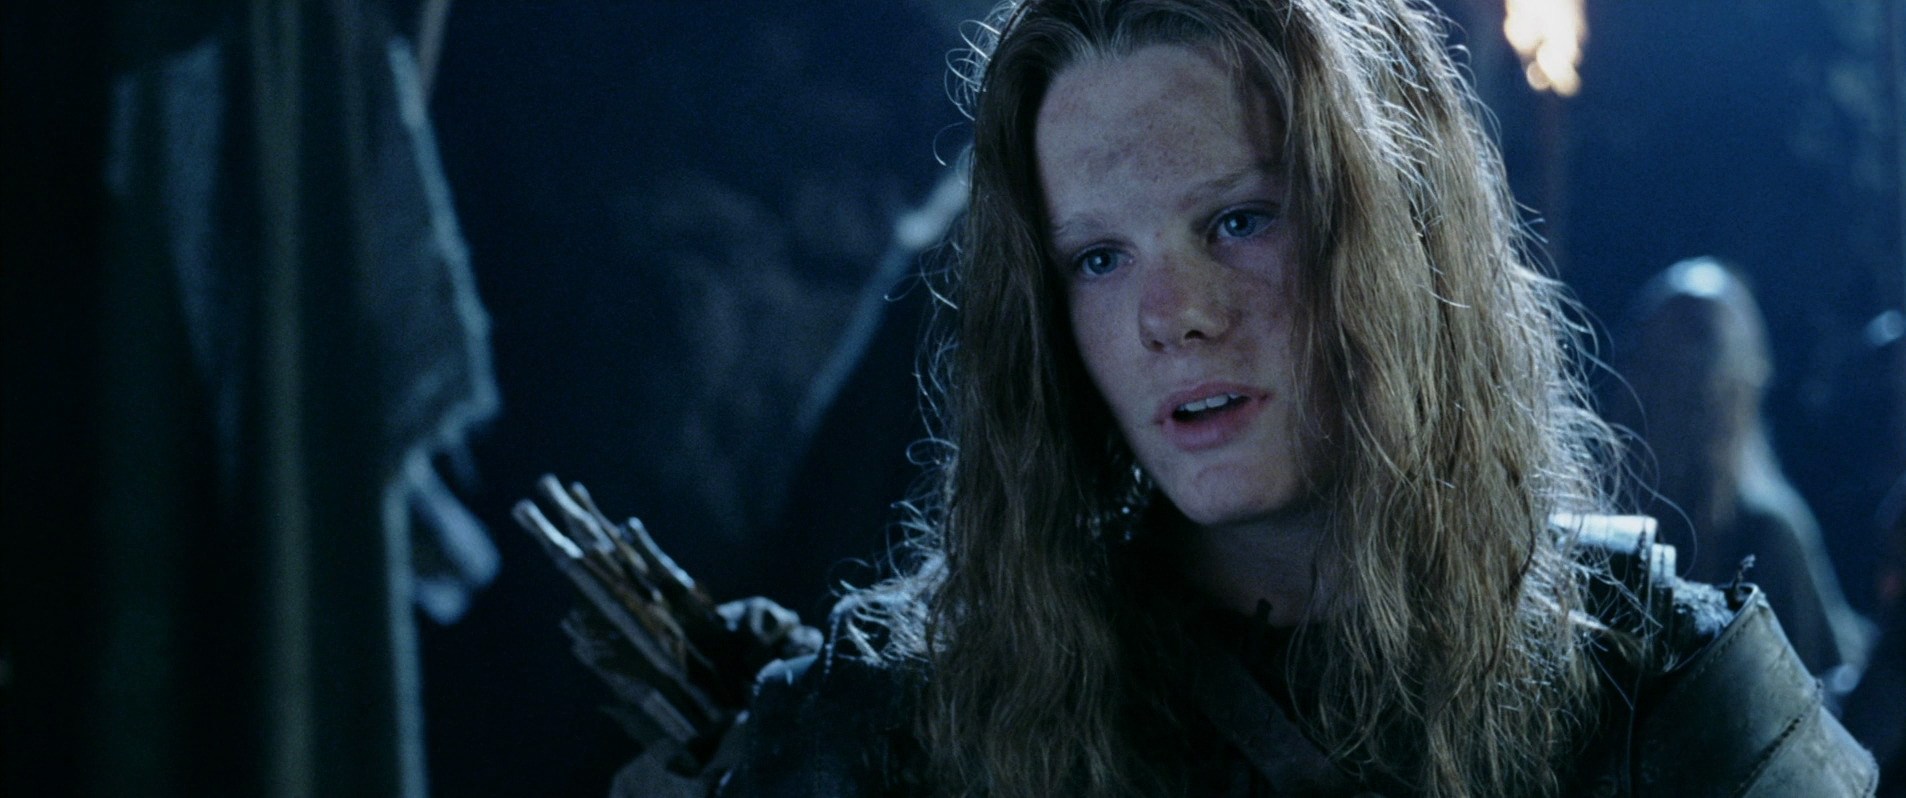 Calum Gittins in The Lord of the Rings: The Two Towers (2002)